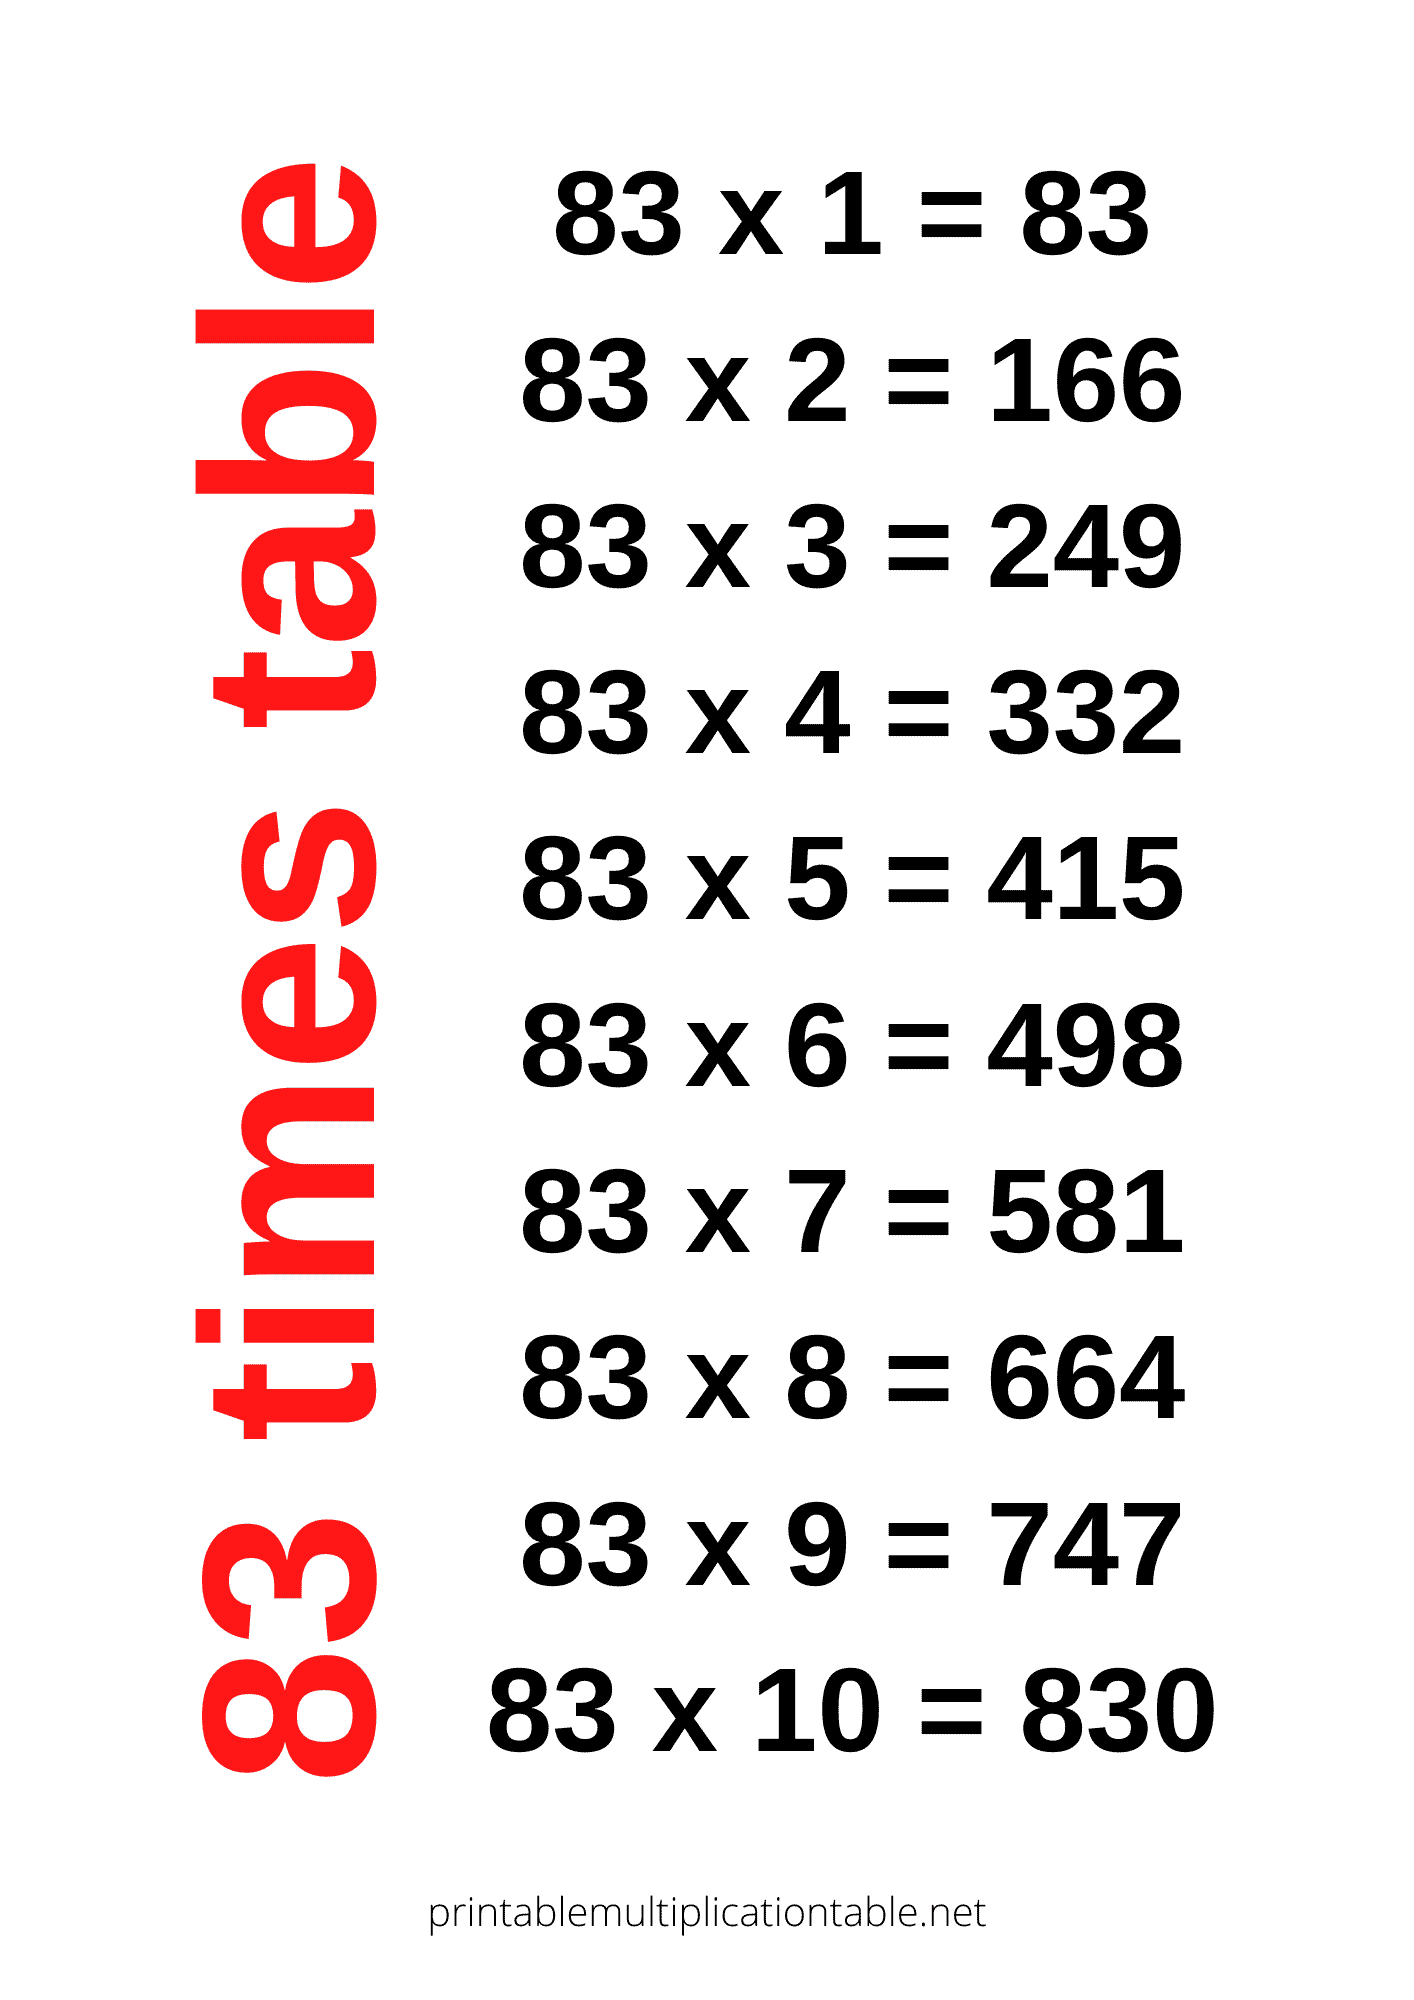 83 times table chart